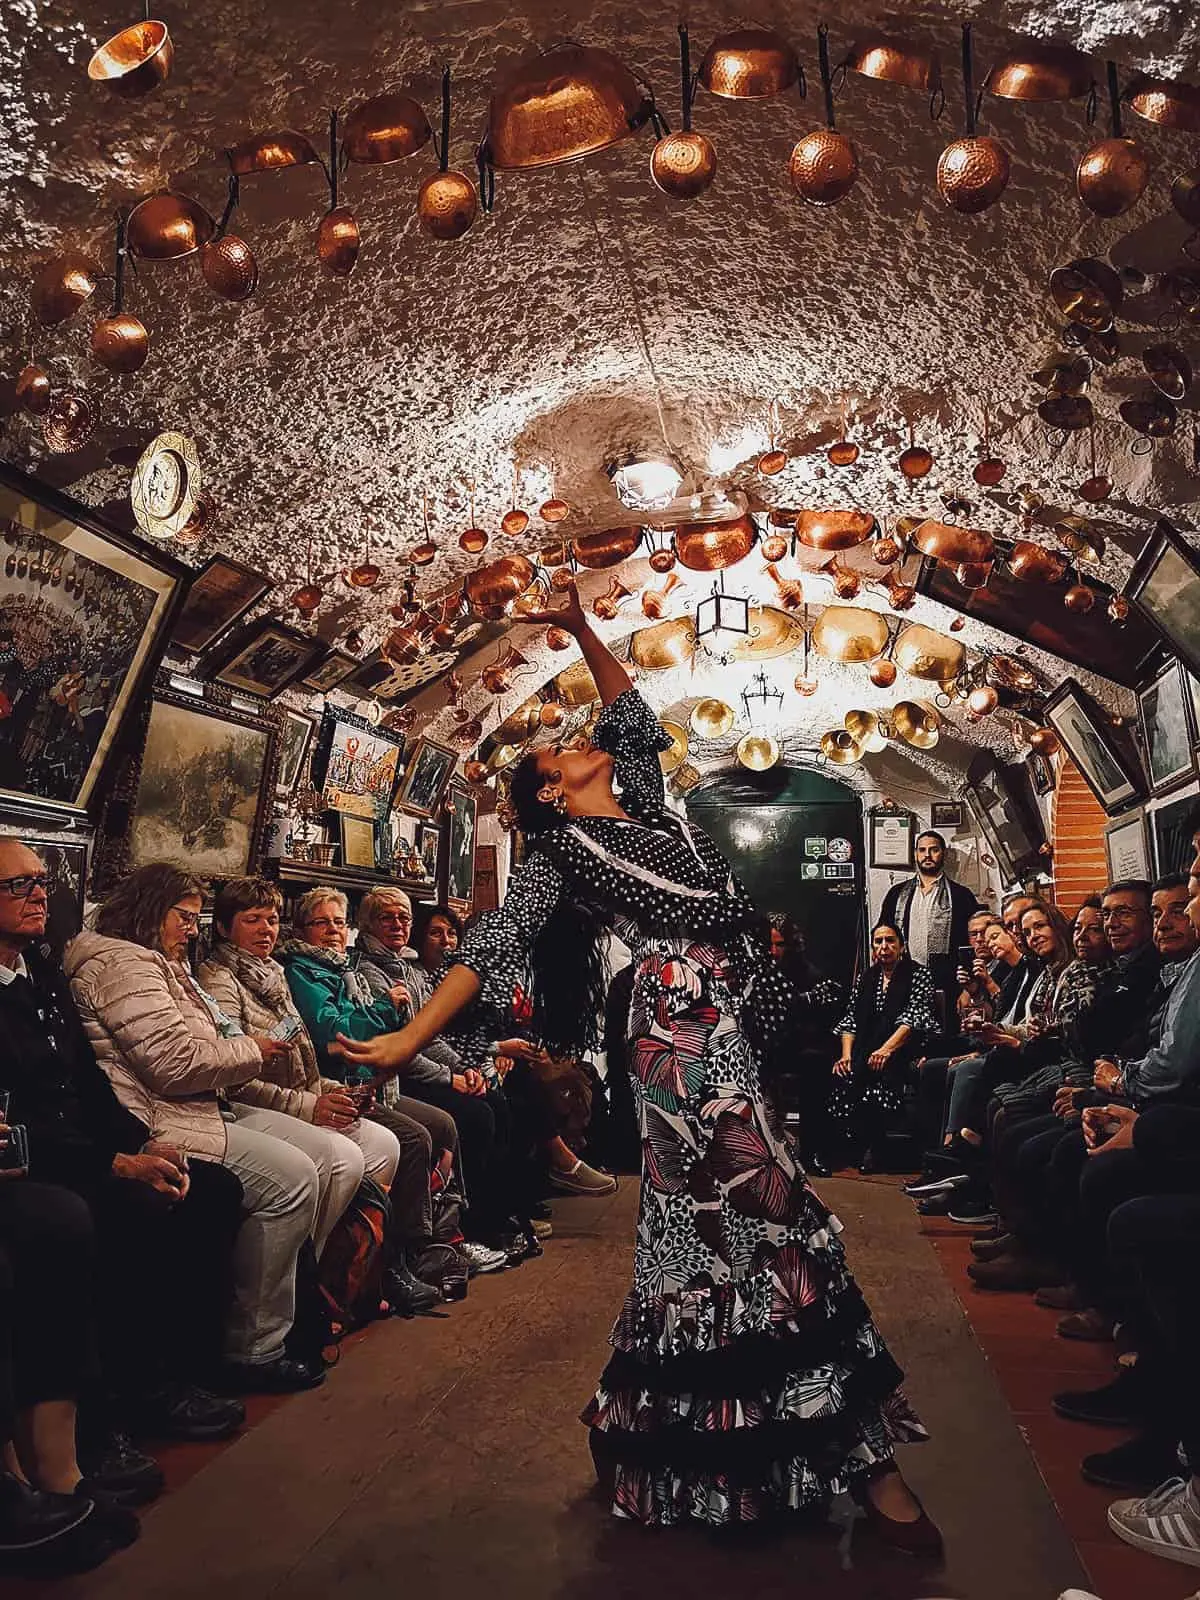 Madrid Travel Guide in Photos: Flamenco dancers performing in southern Spain